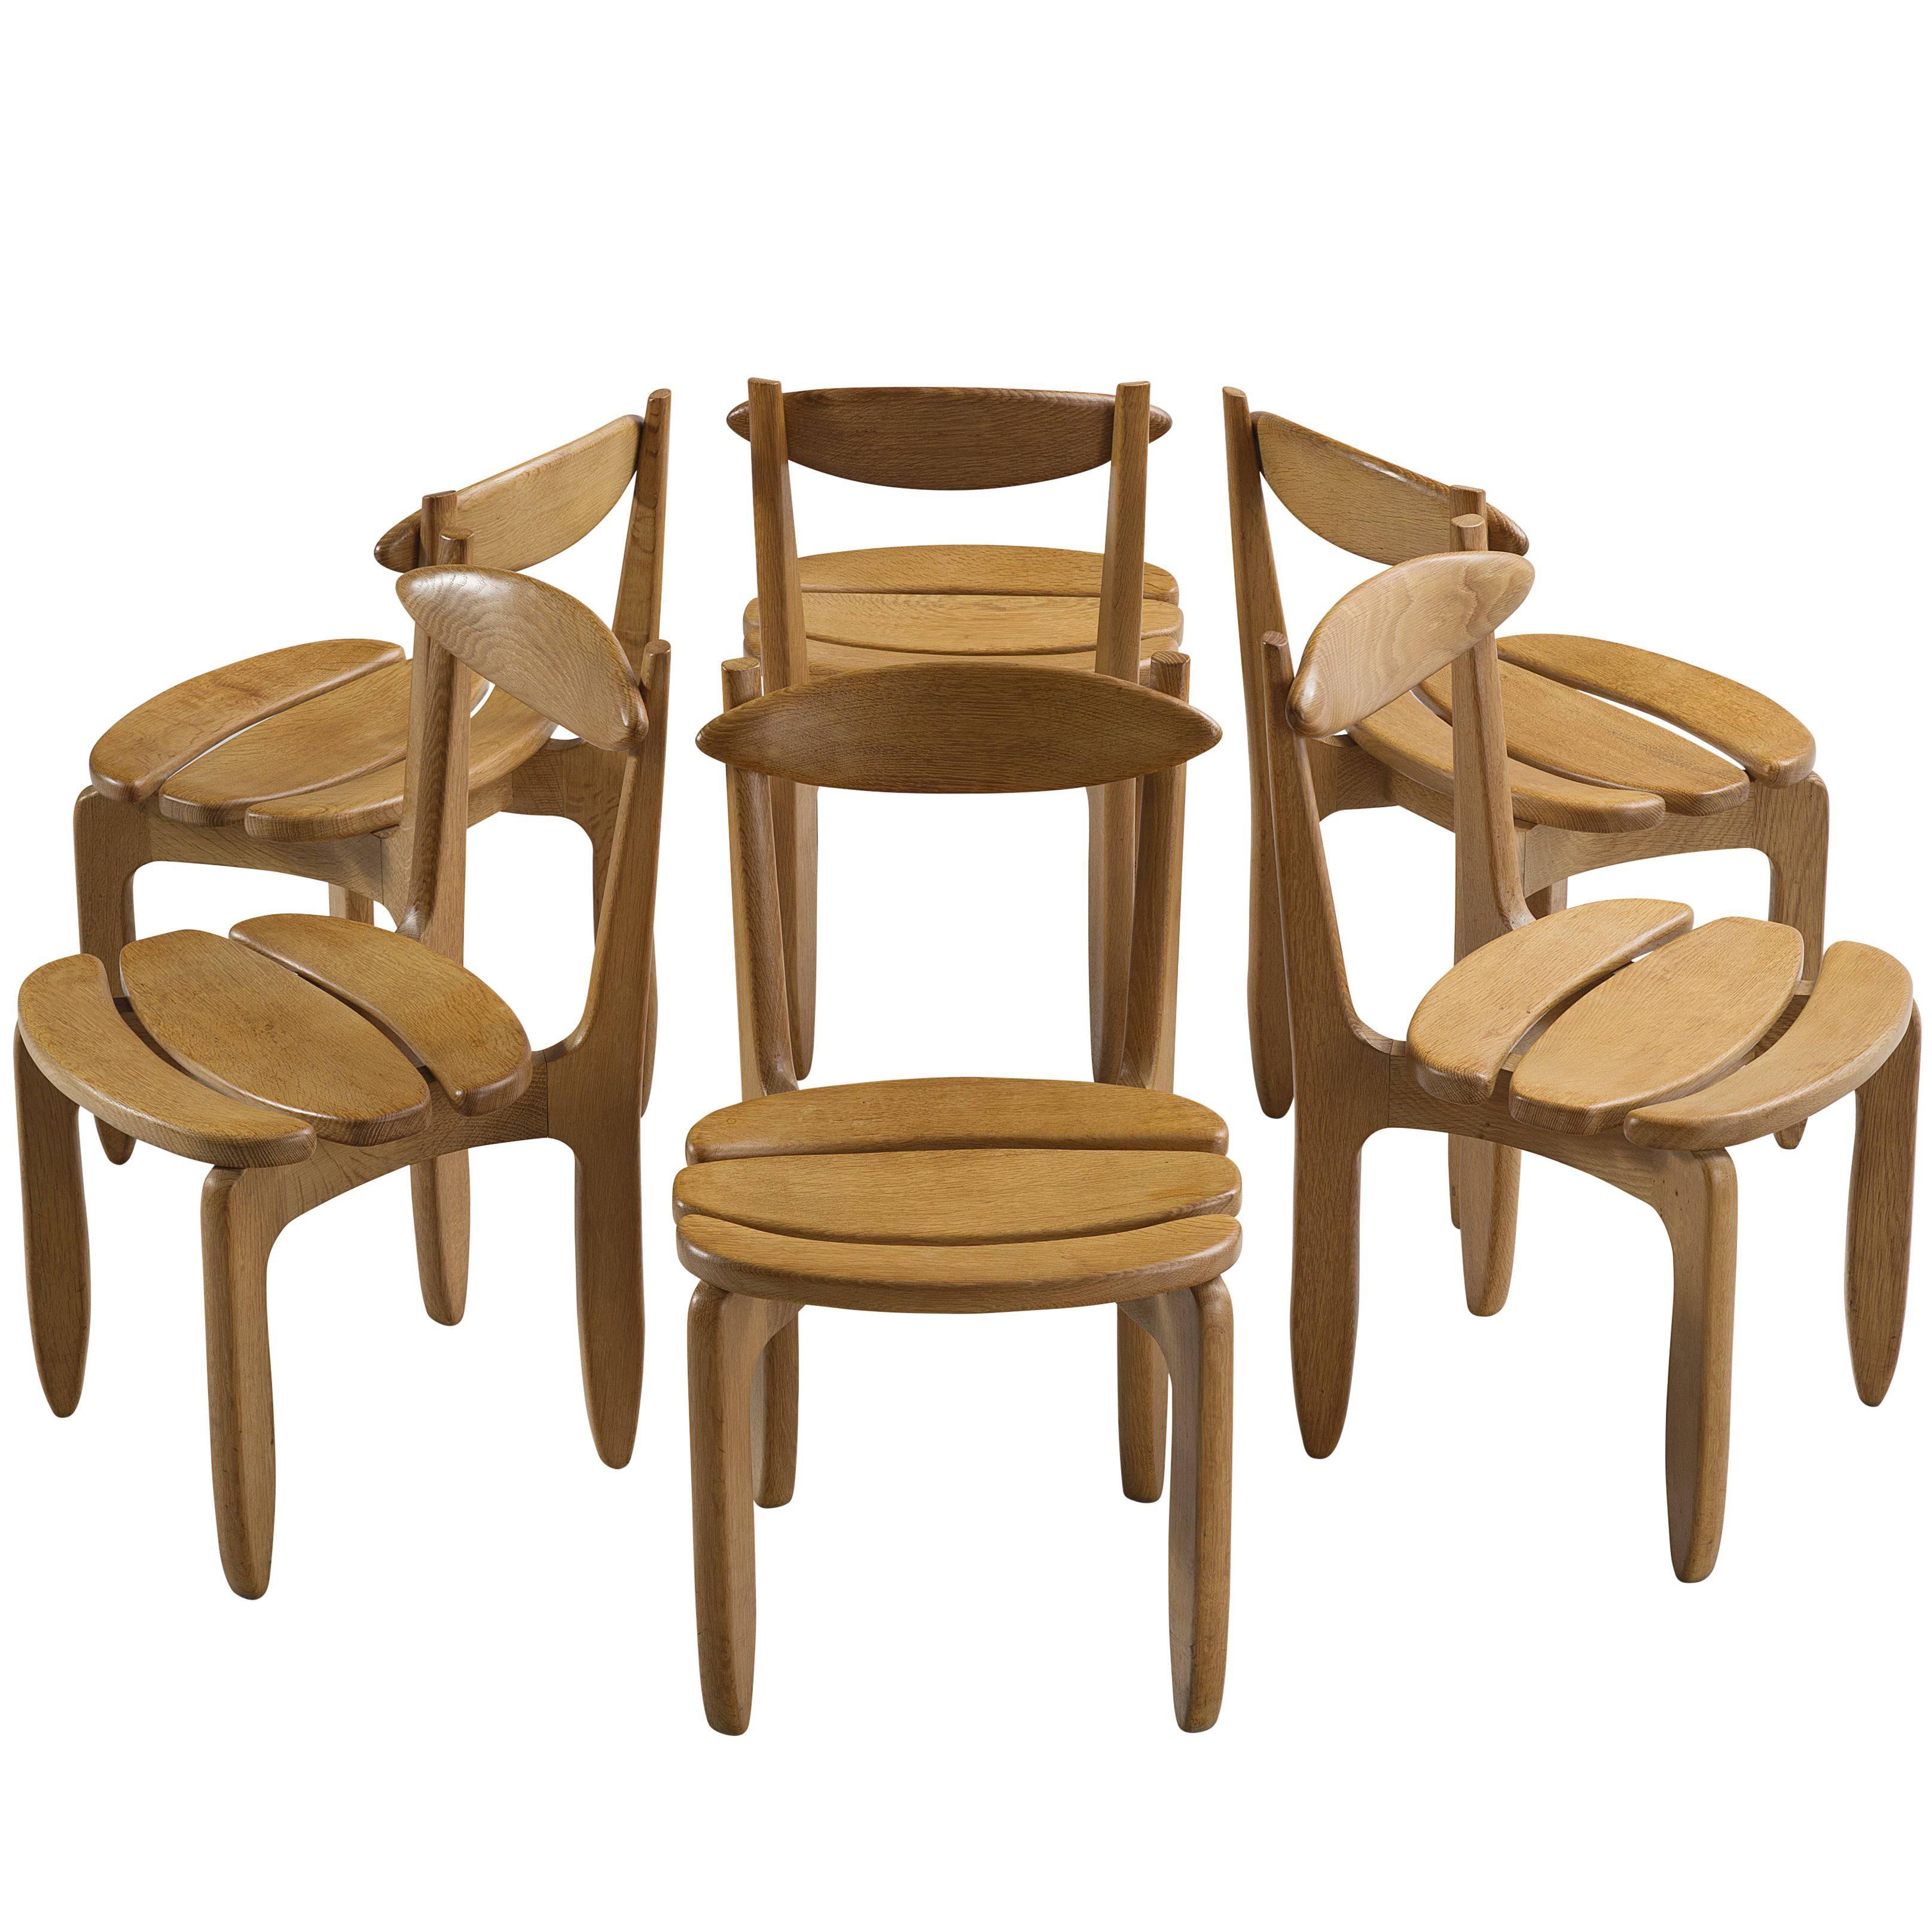 Guillerme & Chambron Set of Six Dining Chairs in Solid Oak